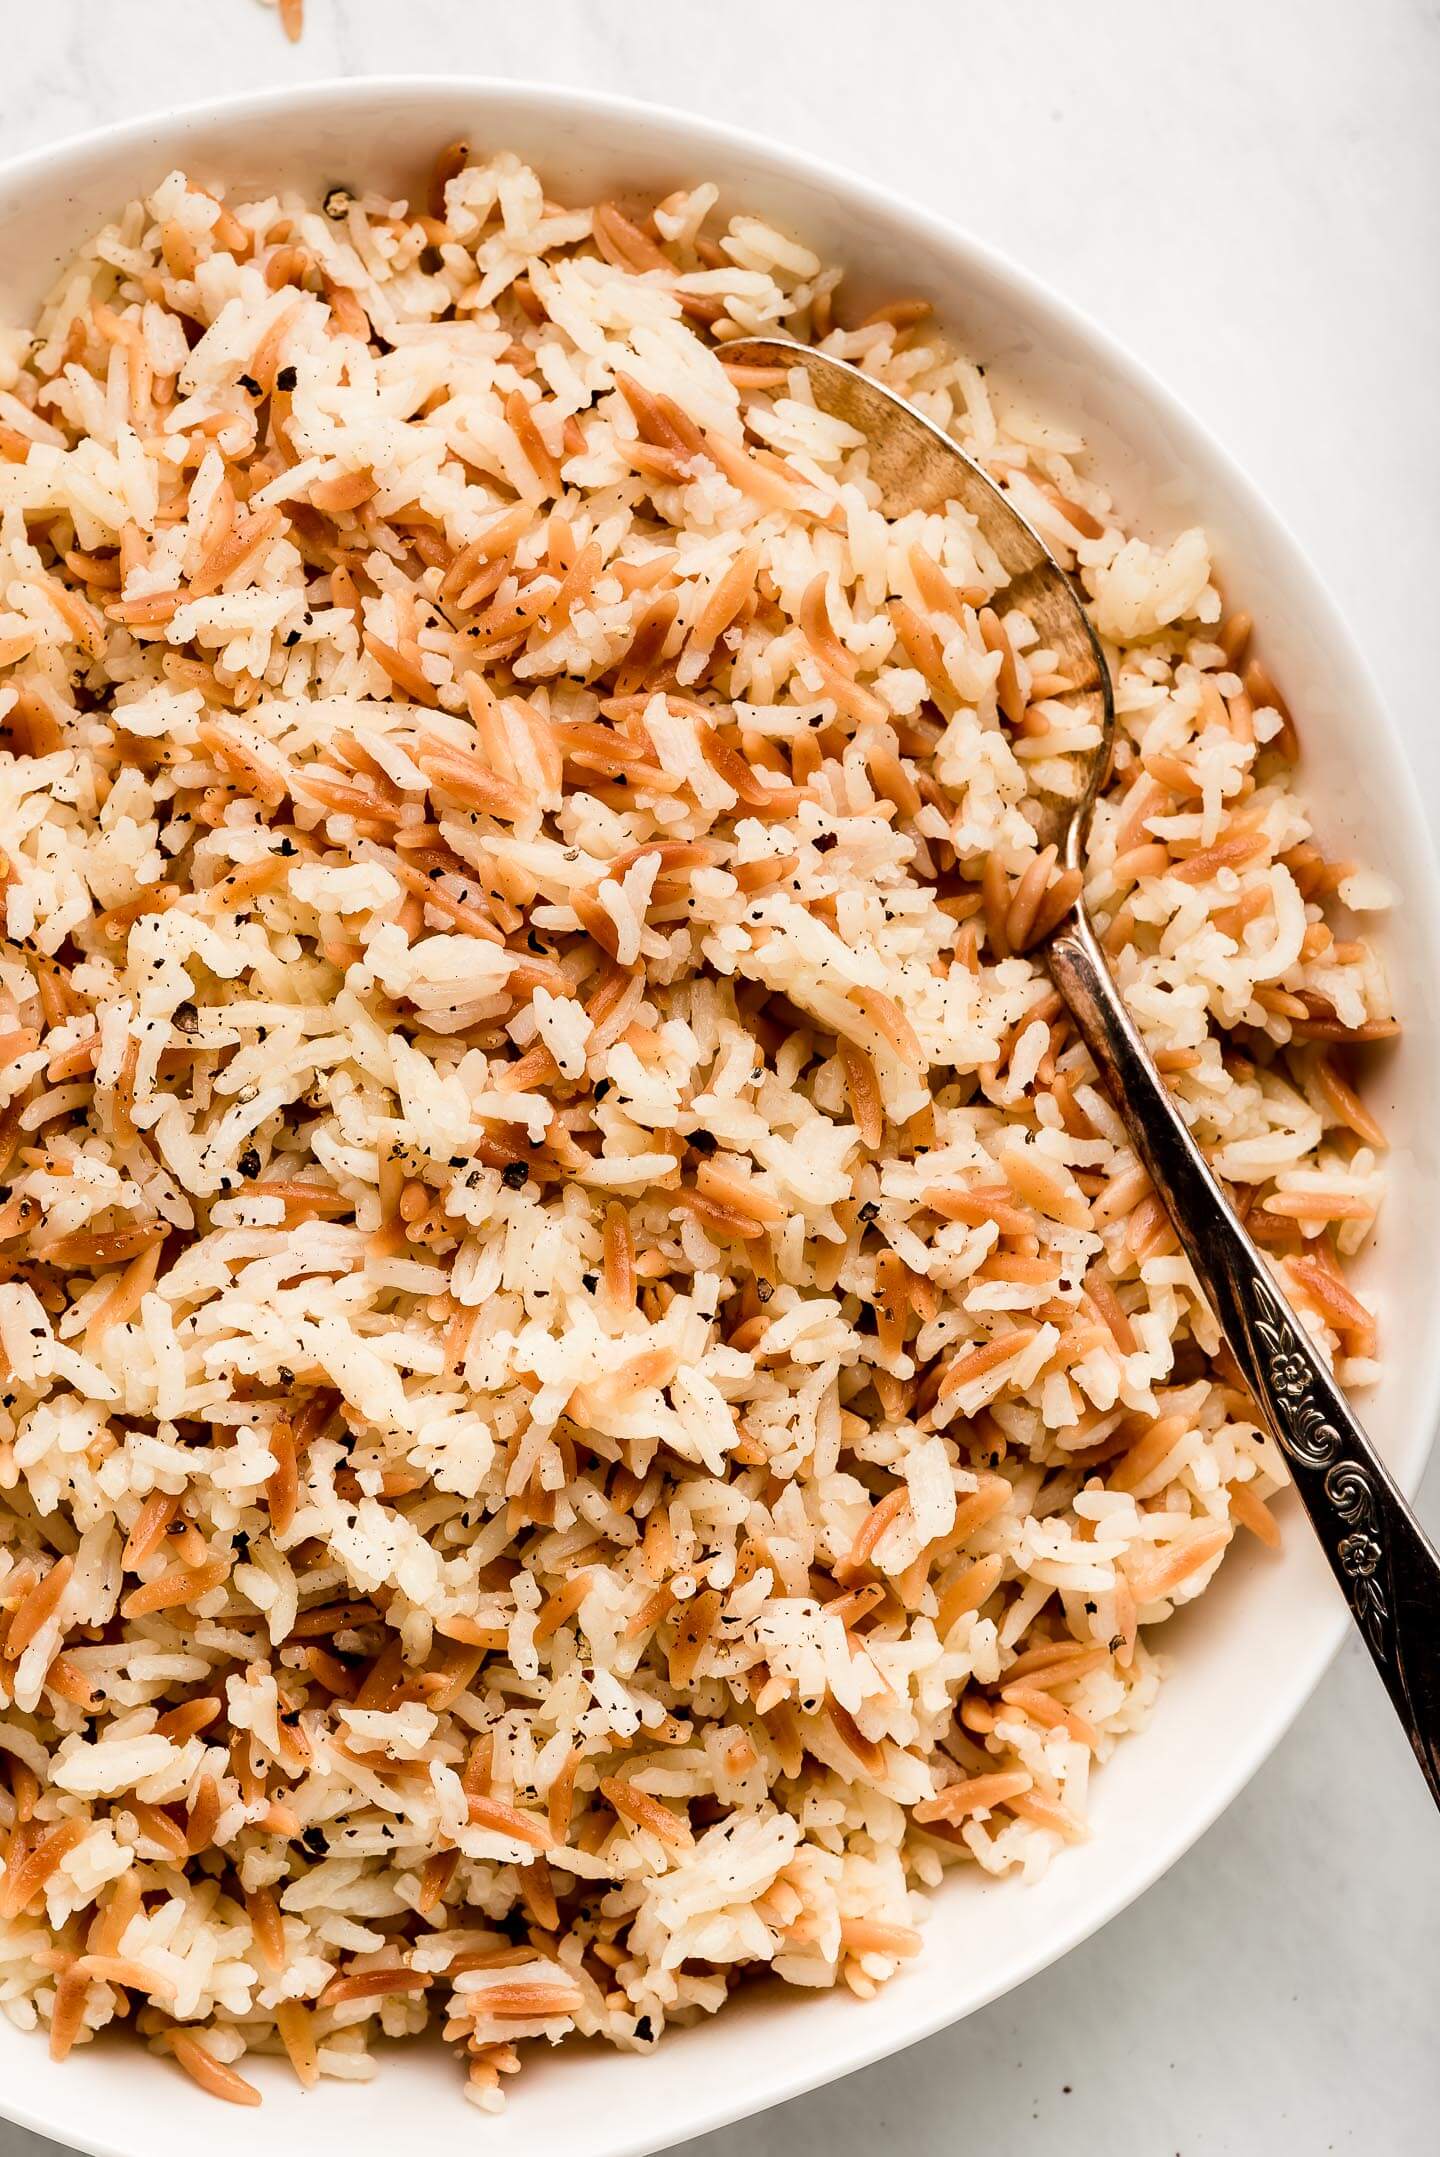 Top view of a bowl of Orzo Rice in a serving bowl.